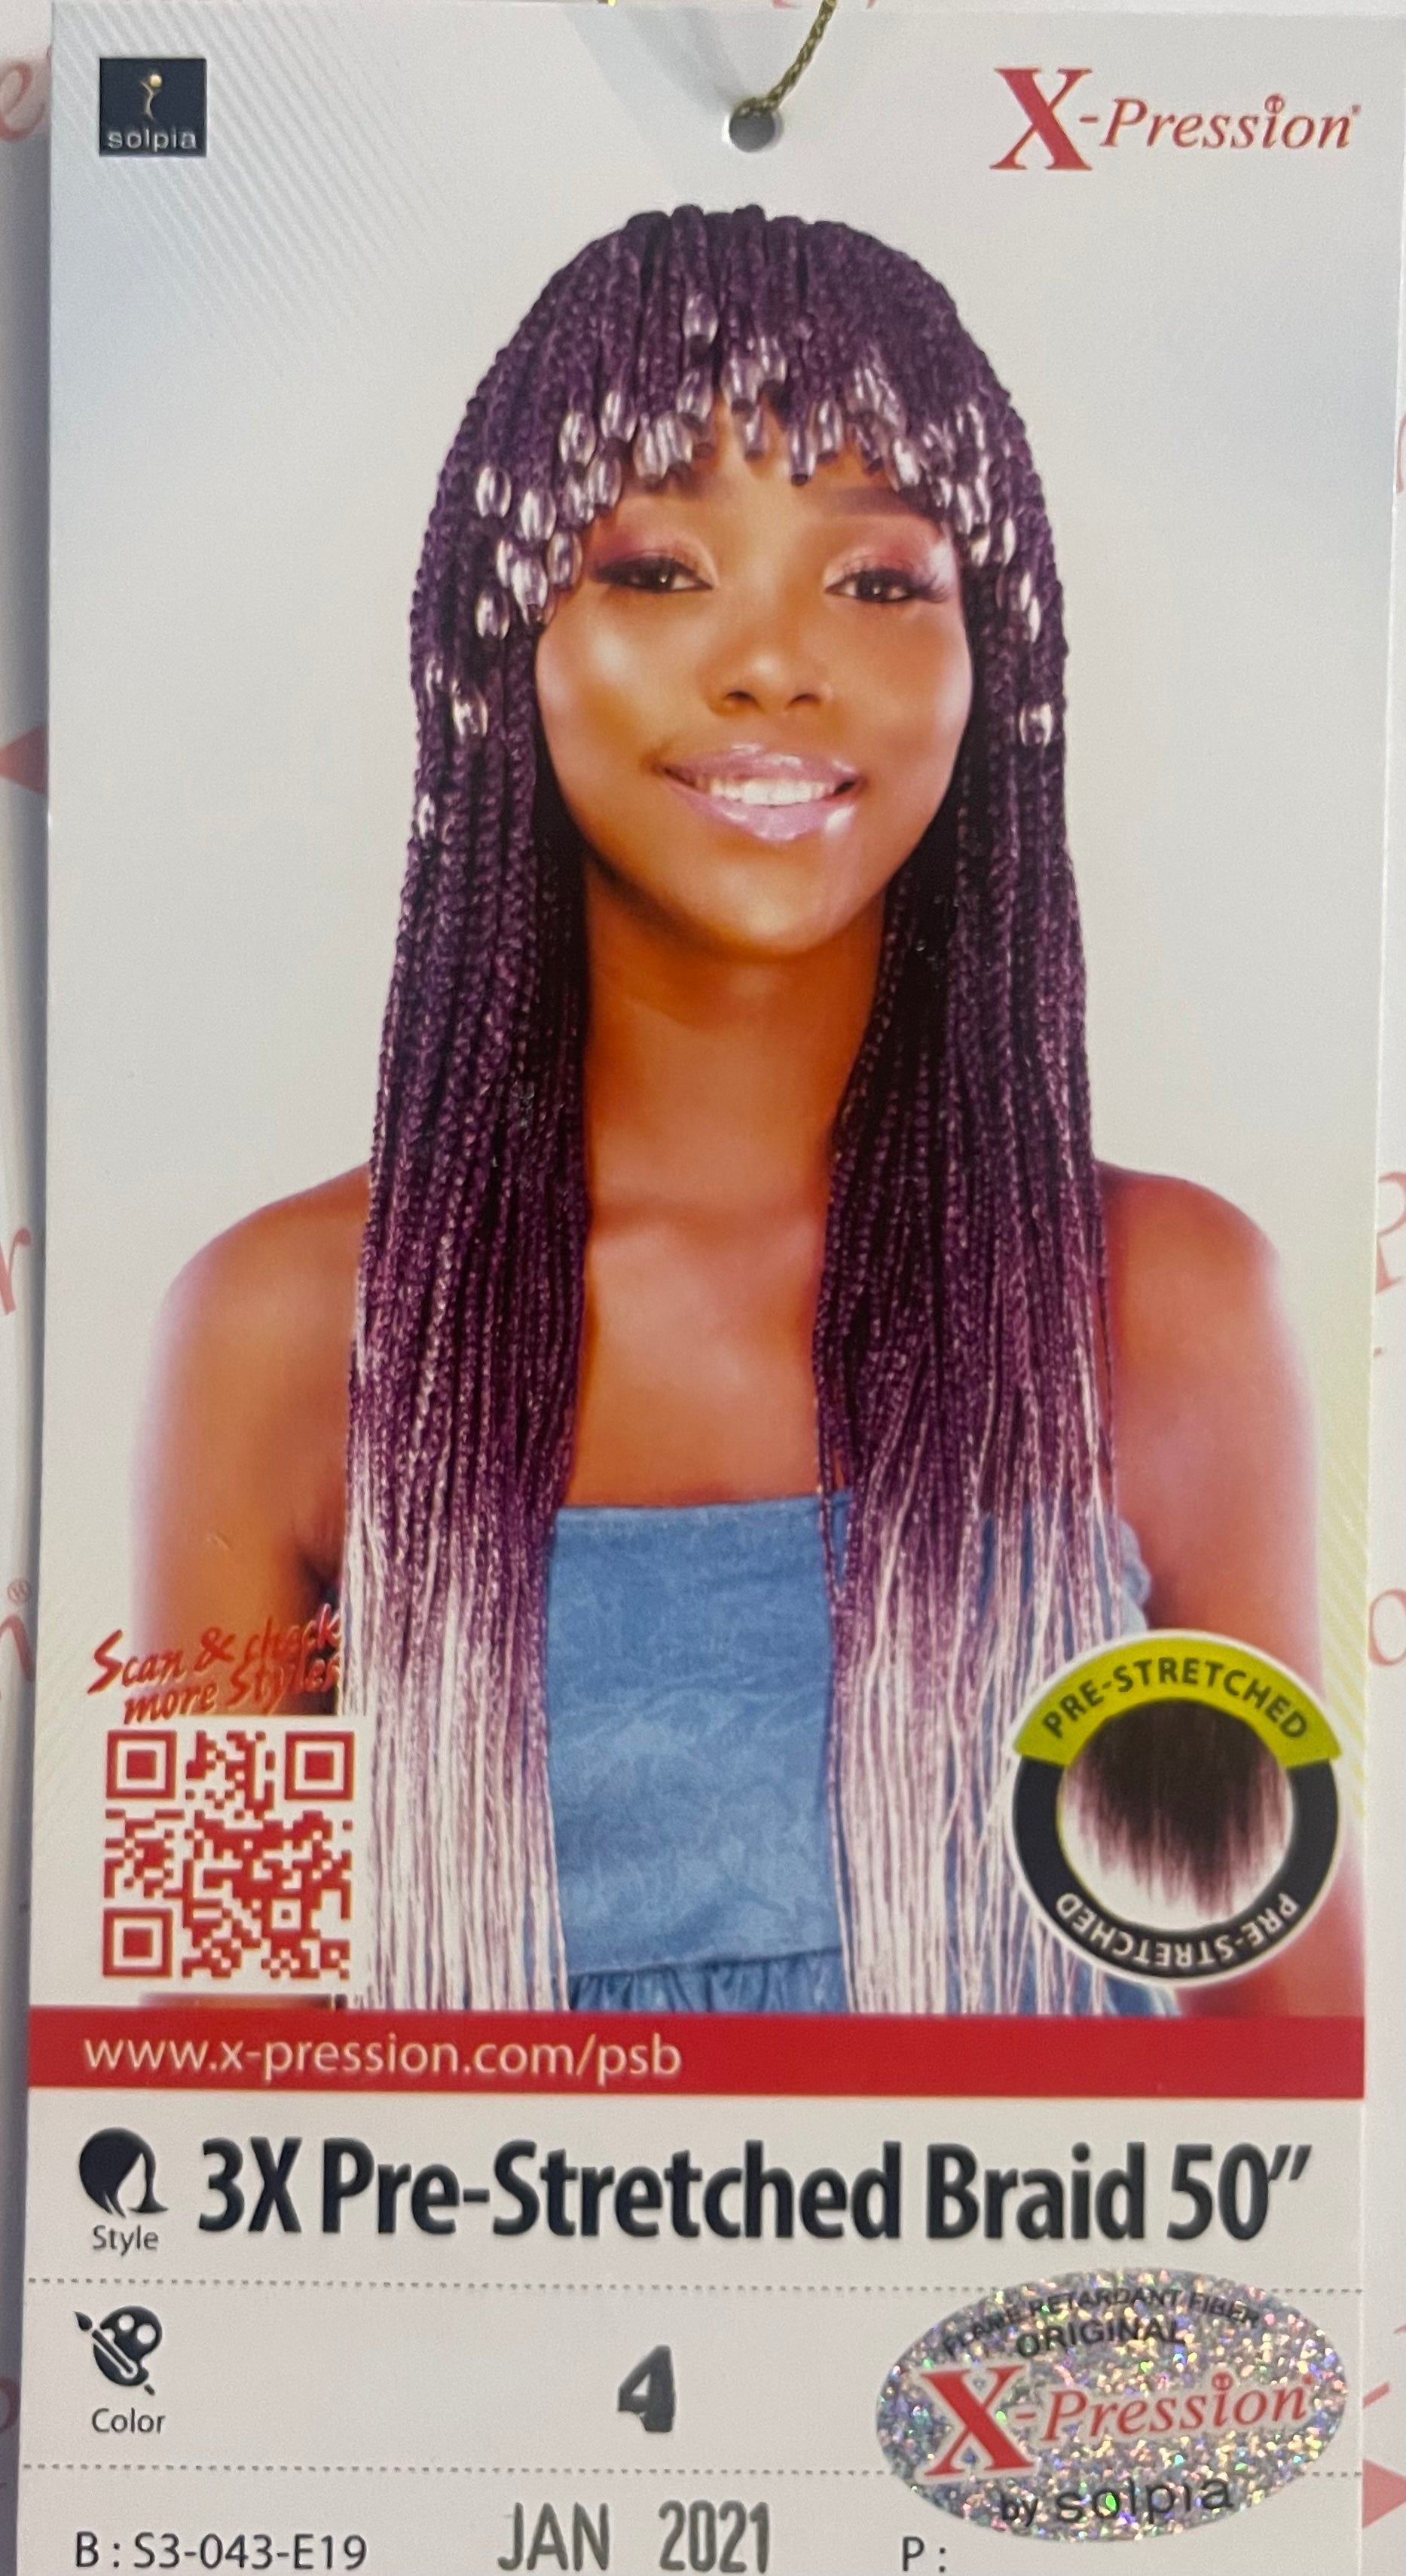 Xpression 3X Pre-Stretched Braid 50 - Hair Selection